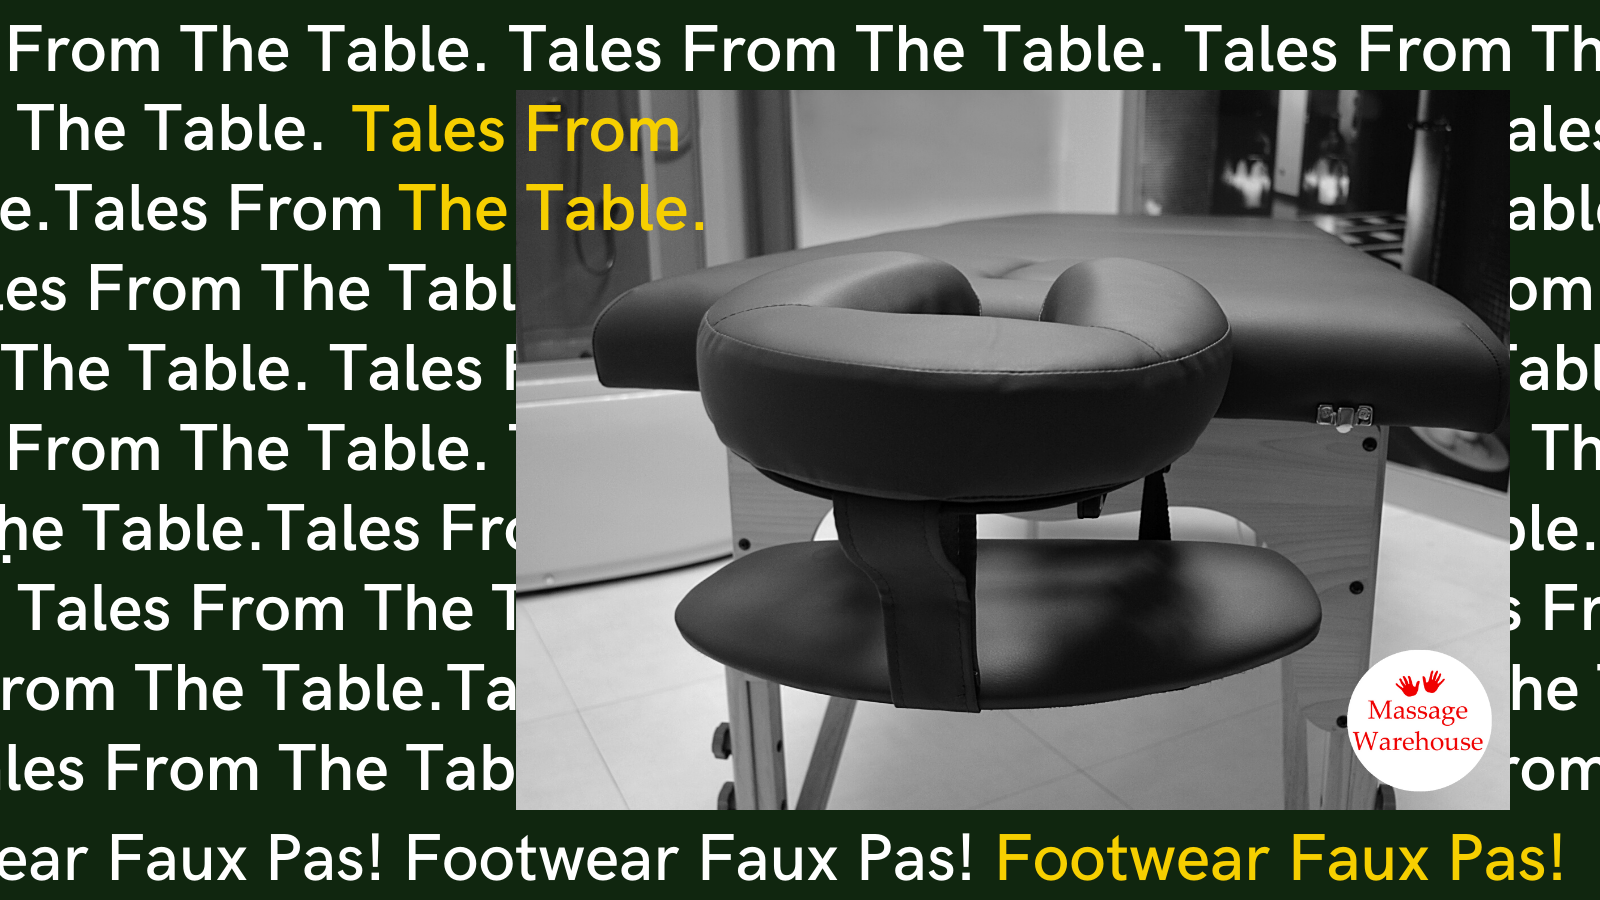 Tales from the Table - Footwear Faux Pas!